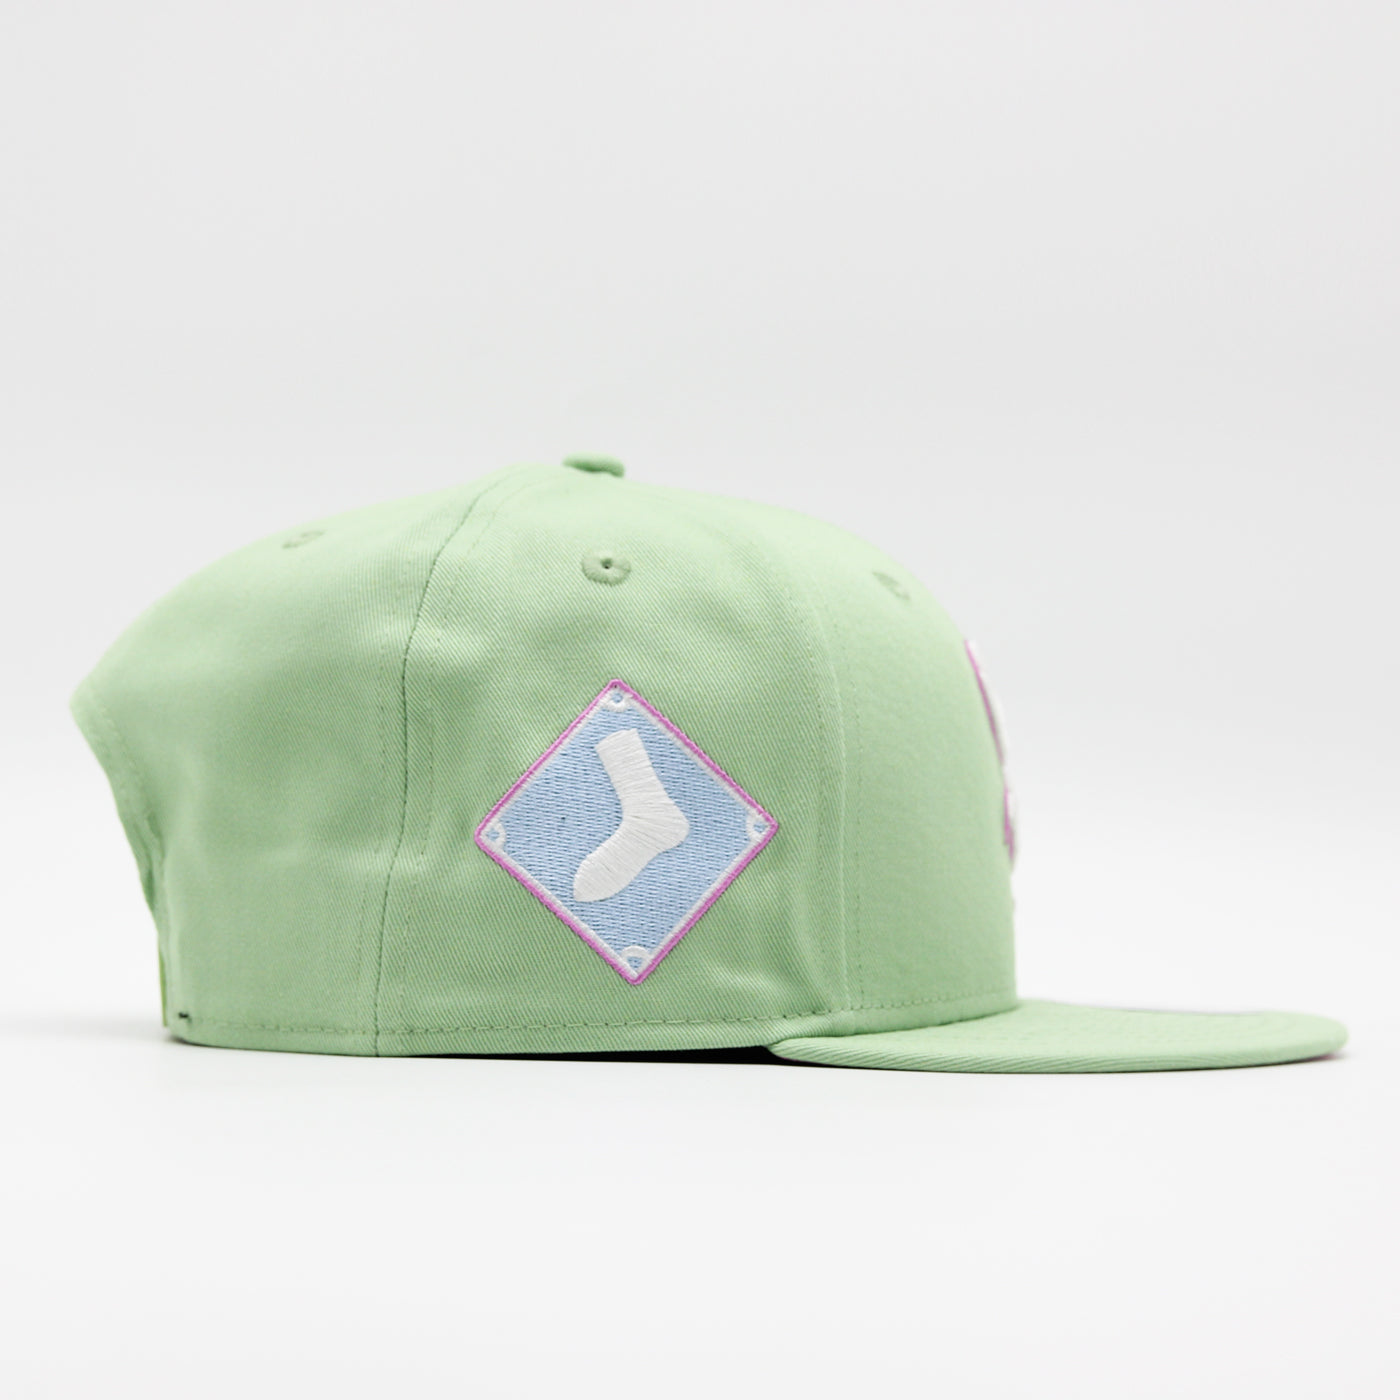 New Era Pastel Patch 9Fifty C White Sox lt.green/wht/pink